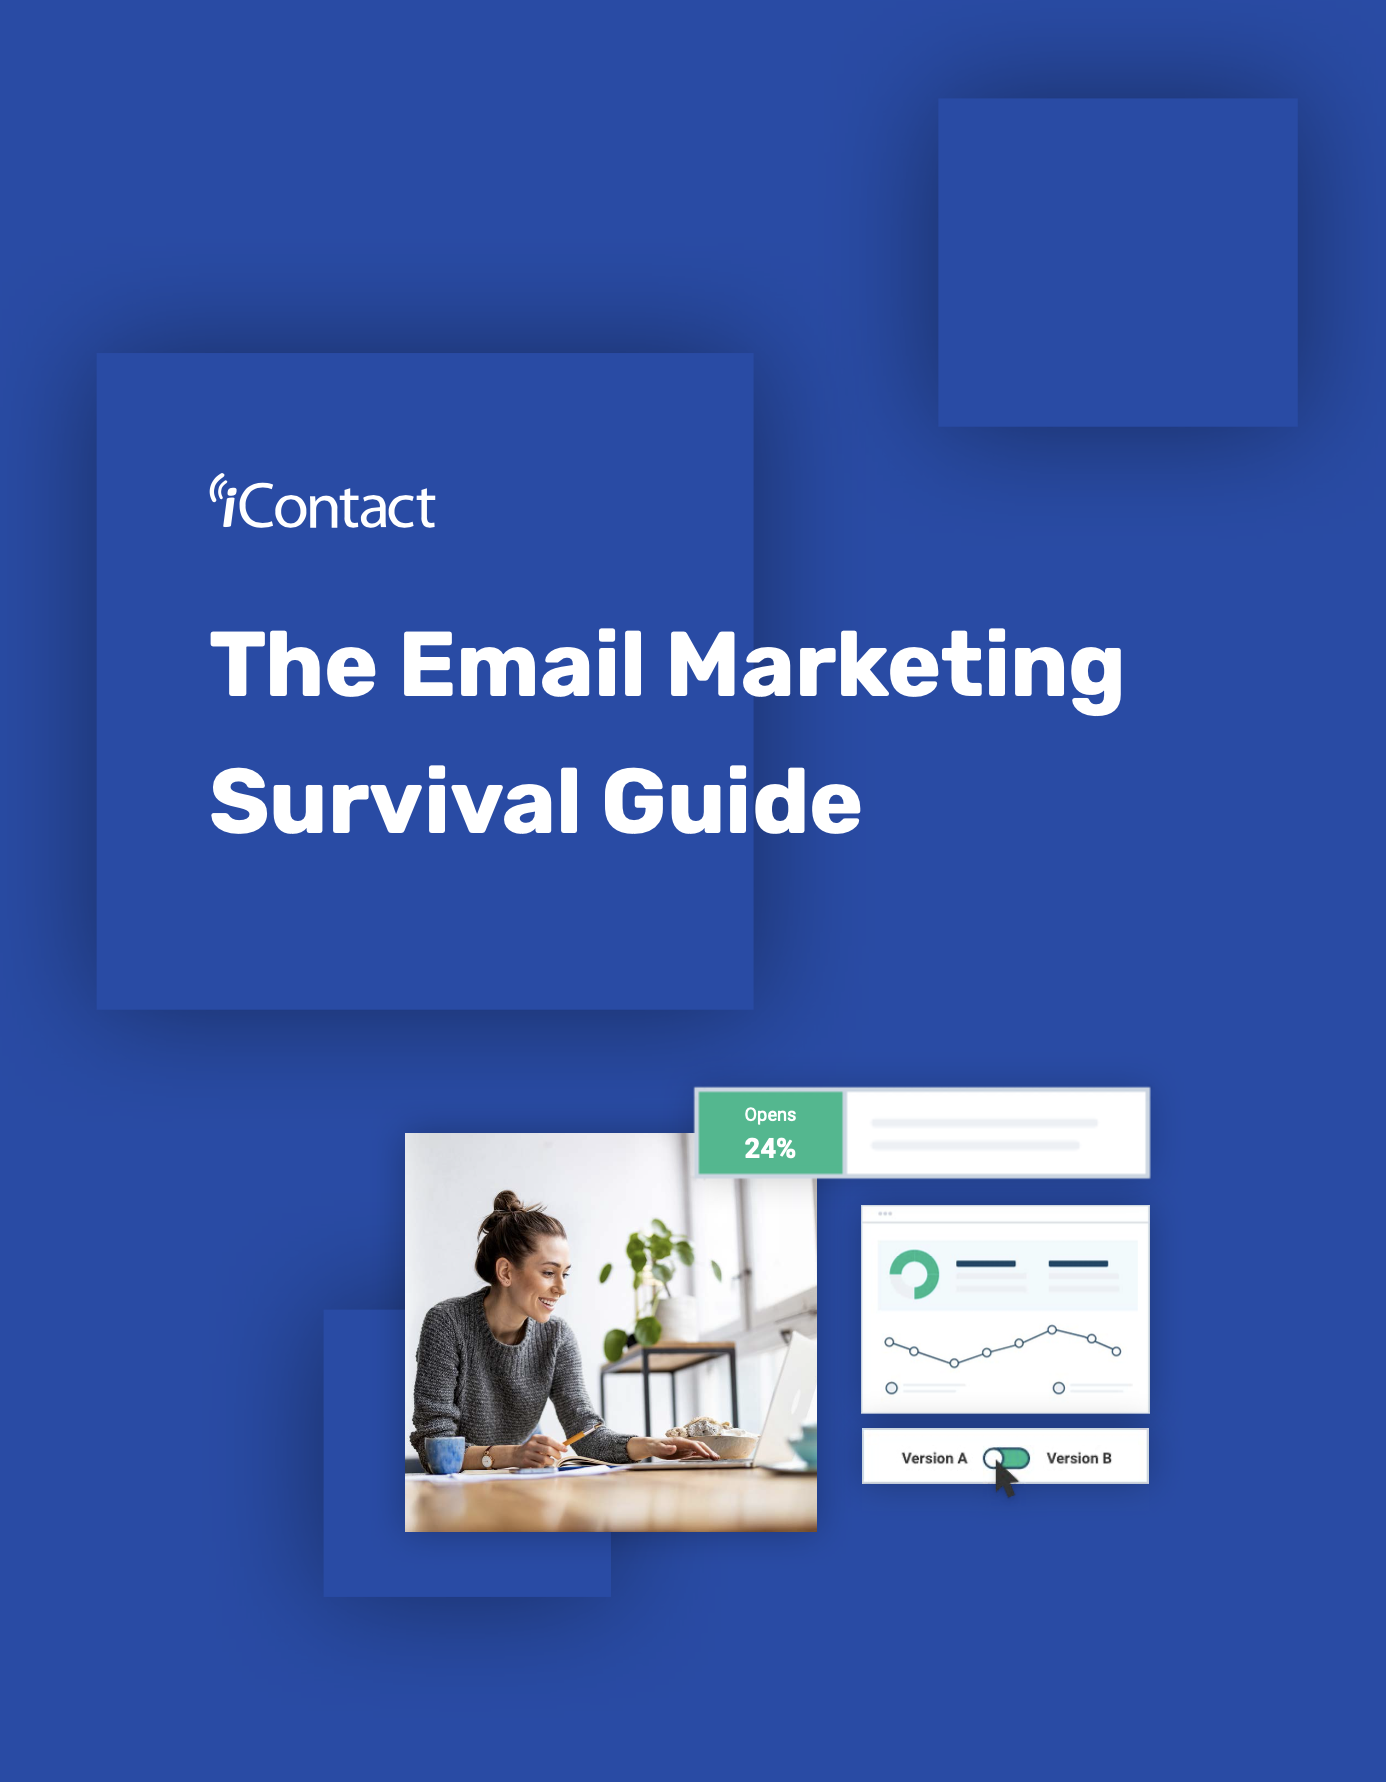 The Email Marketing Survival Guide